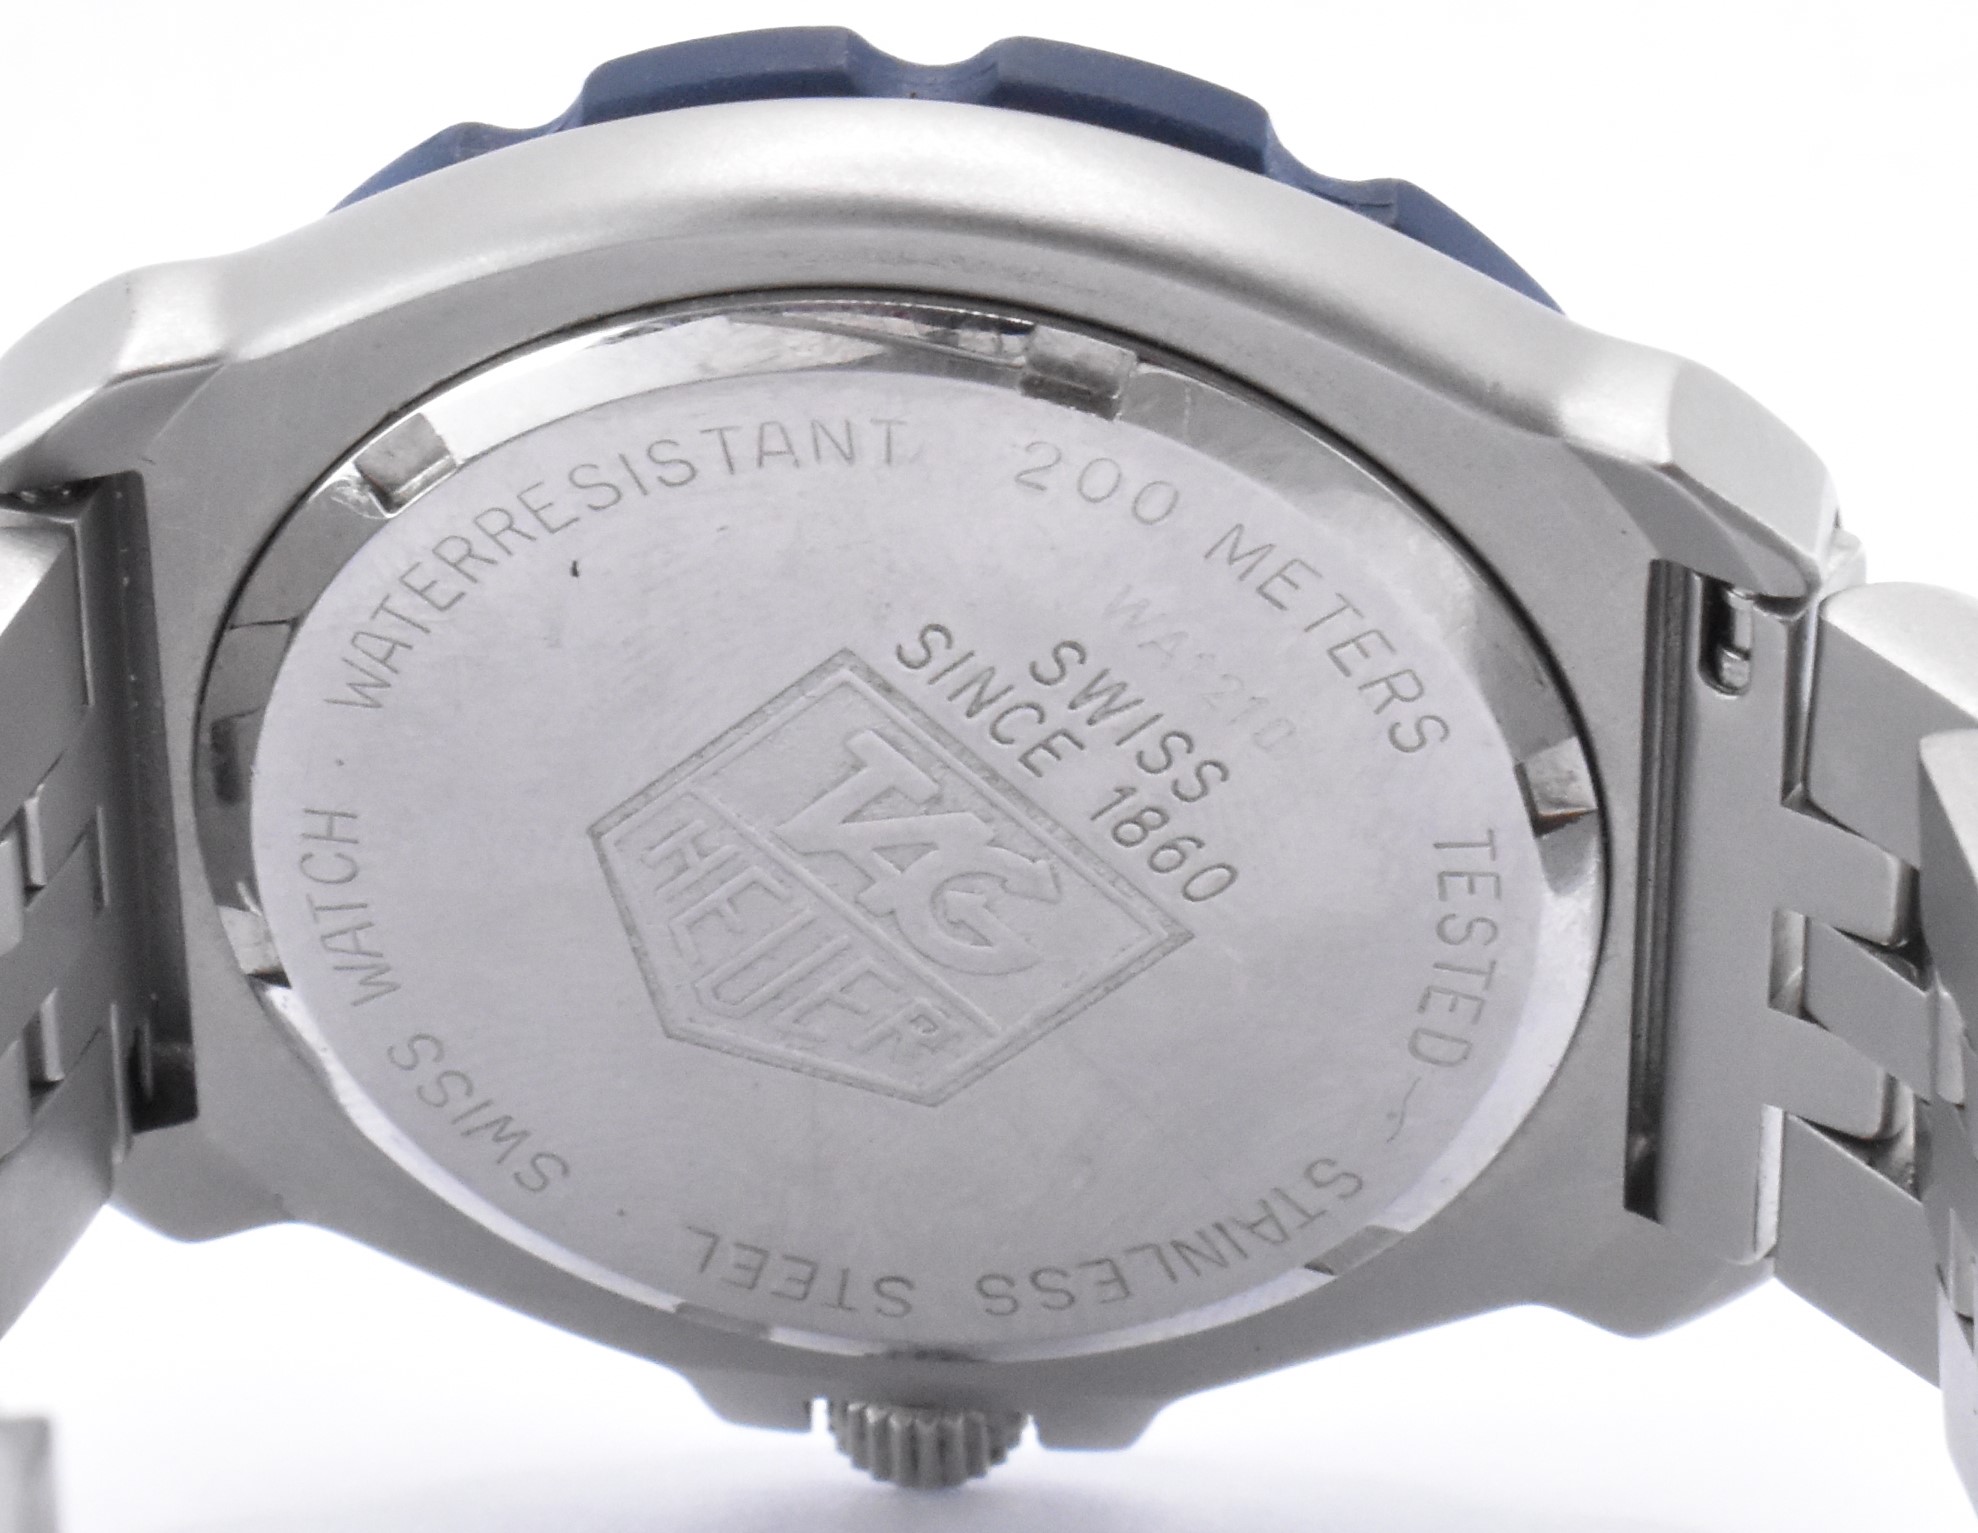 TAG HEUER STAINLESS STEEL DIVERS WATCH - Image 4 of 5